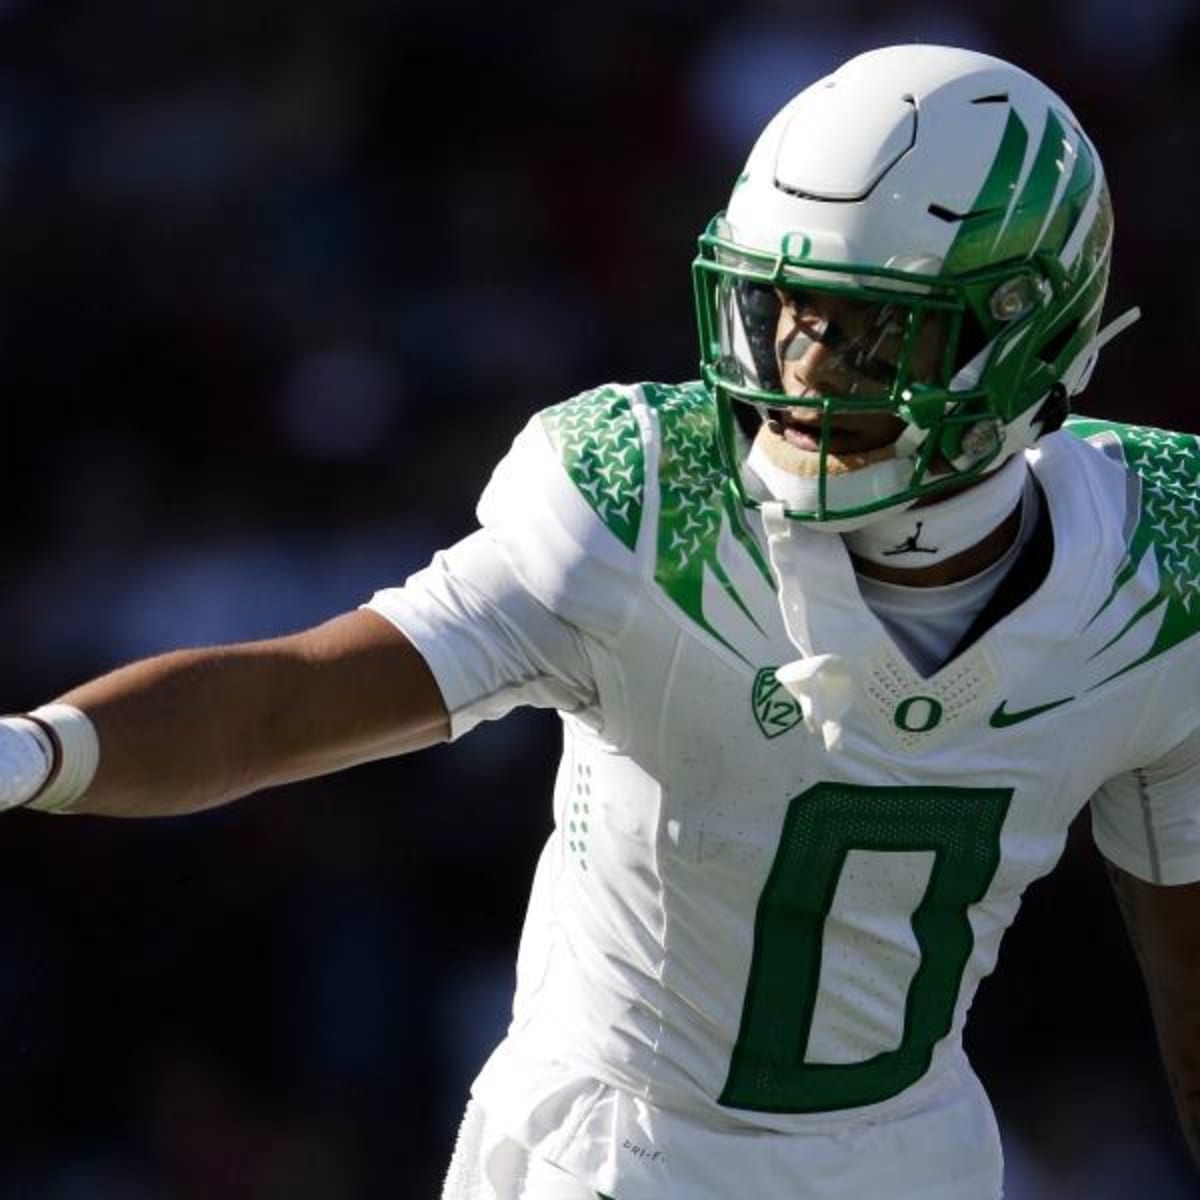 Ric Serritella 2023 NFL Mock Draft for Sports Illustrated - Visit NFL Draft  on Sports Illustrated, the latest news coverage, with rankings for NFL Draft  prospects, College Football, Dynasty and Devy Fantasy Football.